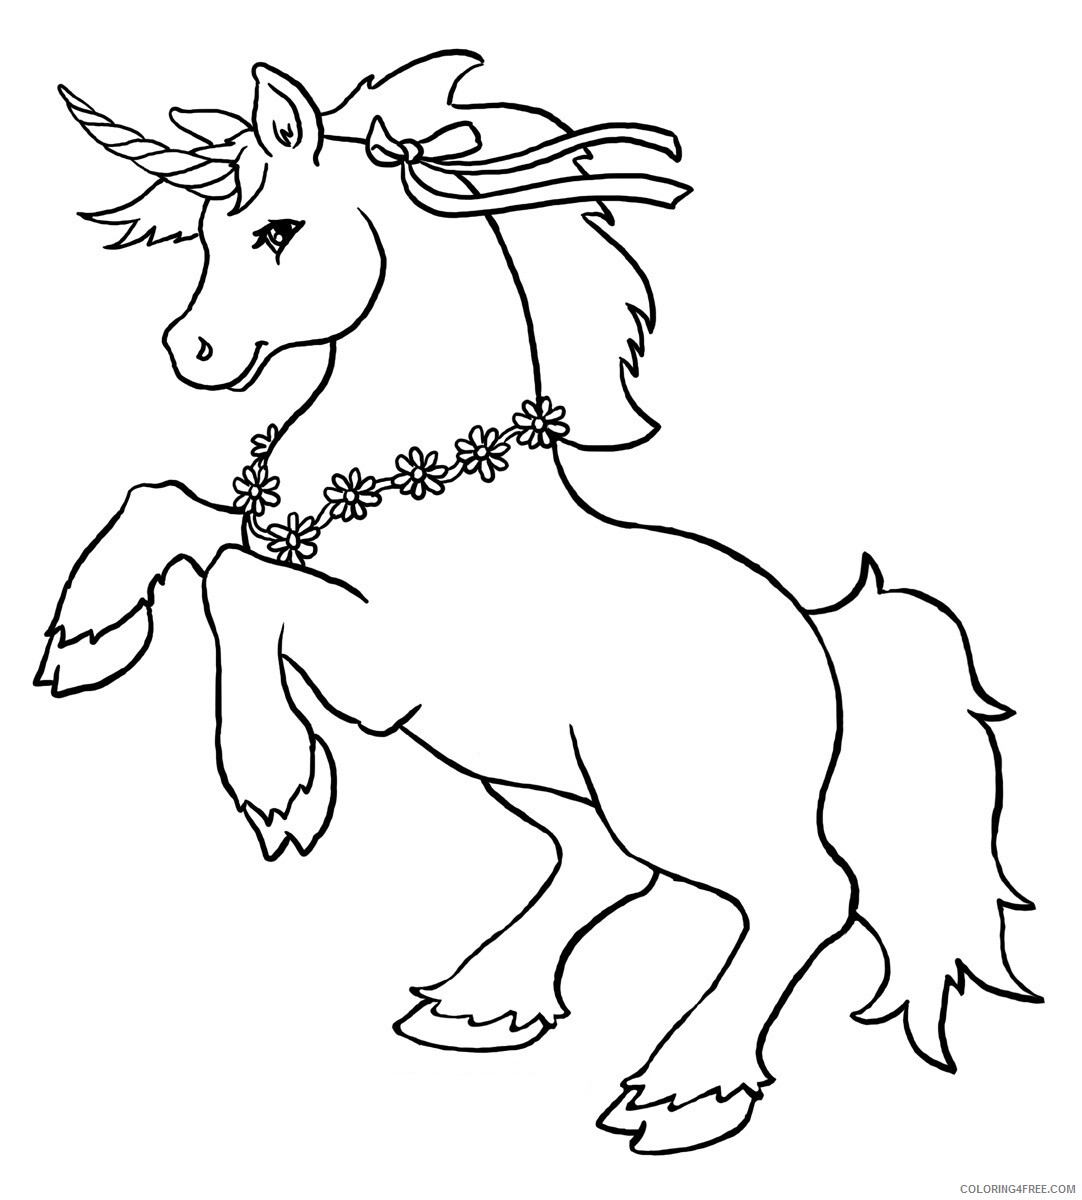 Unicorn Coloring Pages Cute Unicorn Printable 2021 6029 Coloring4free